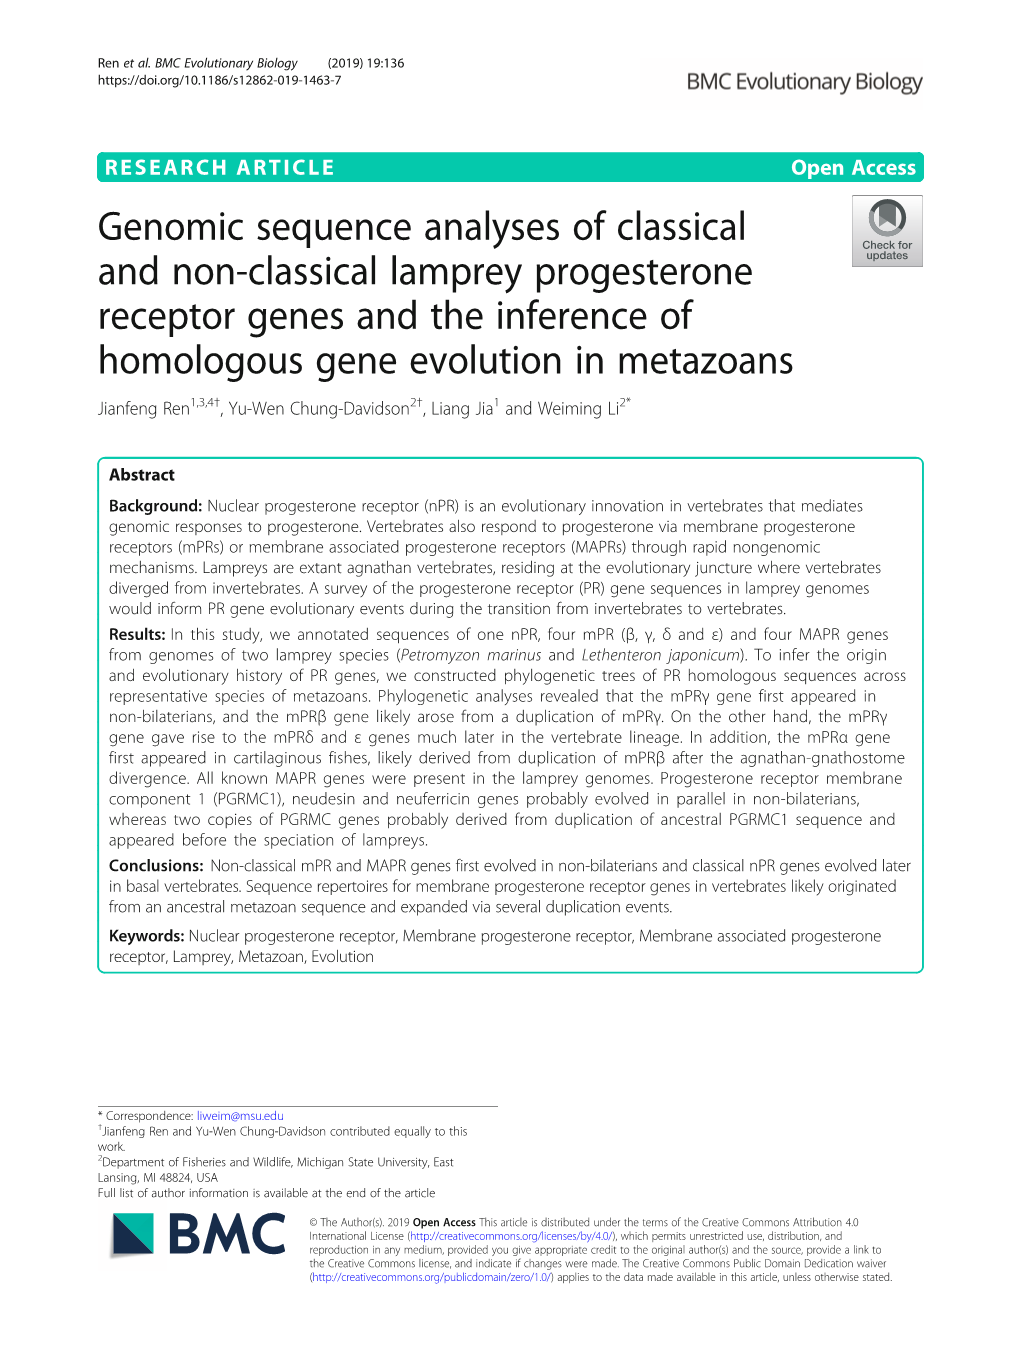 Genomic Sequence Analyses of Classical and Non-Classical Lamprey